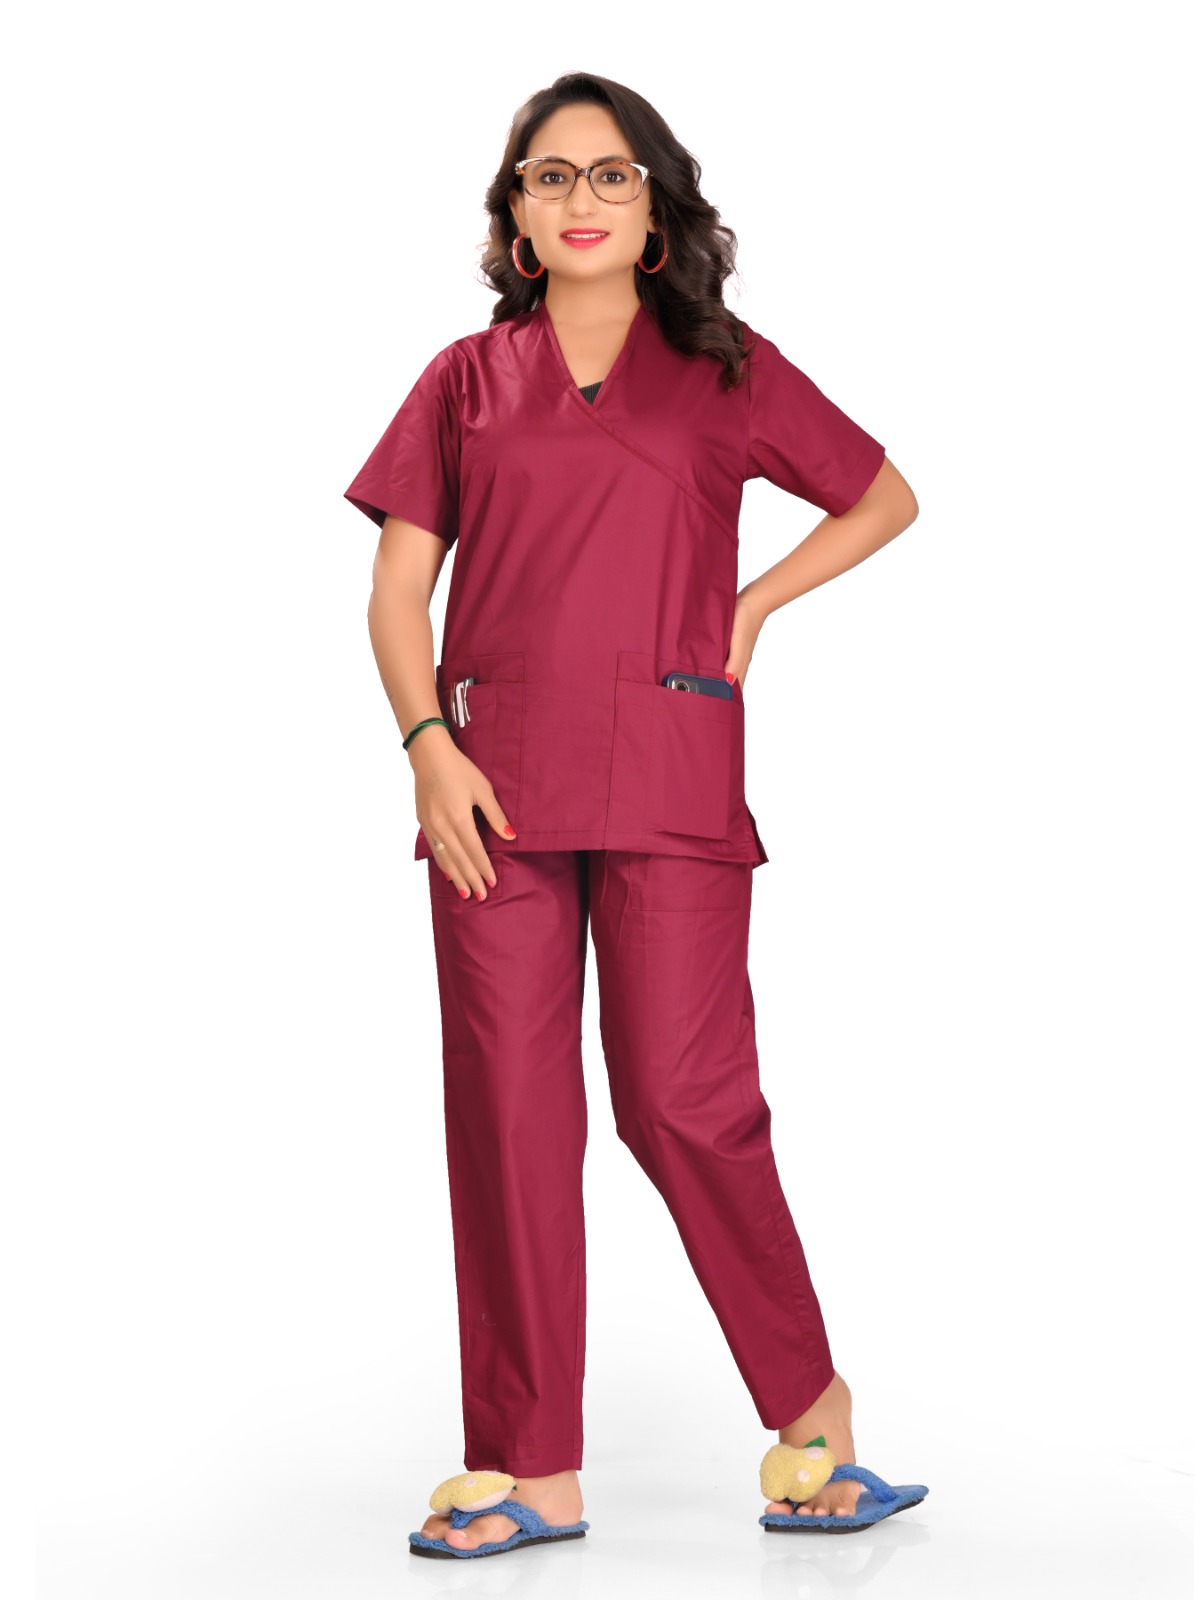 Maroon Scrub Suits for Women